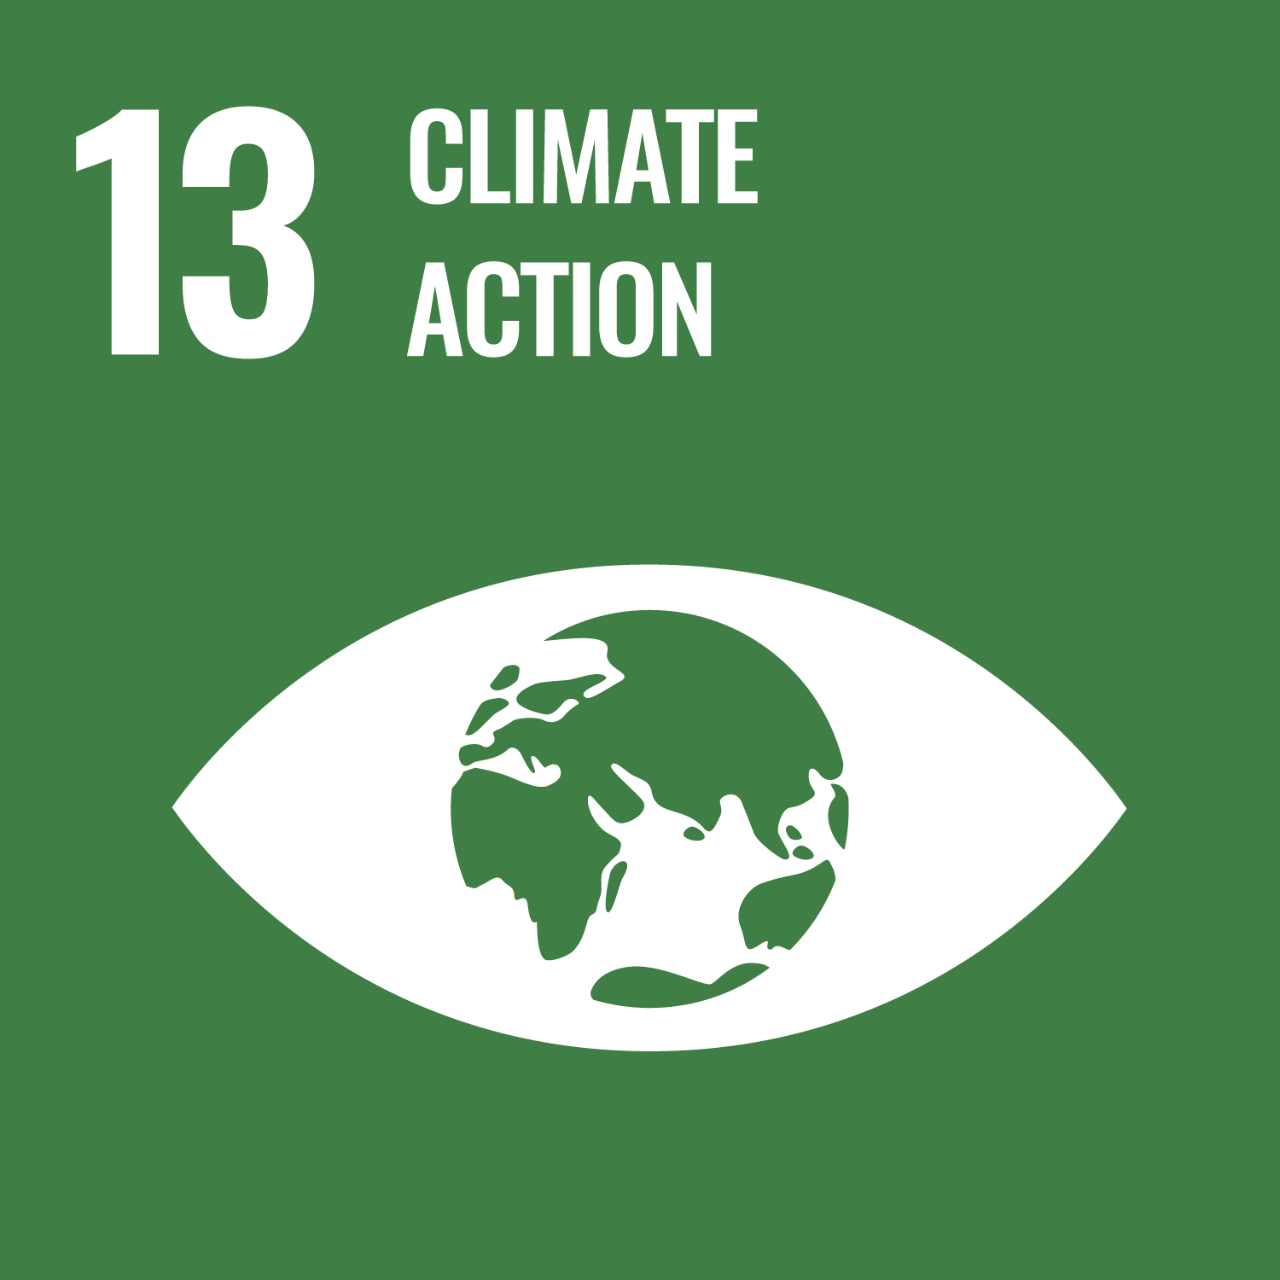 The Sustainable Development Goal 13 aims to take urgent action to combat climate change and its impacts”